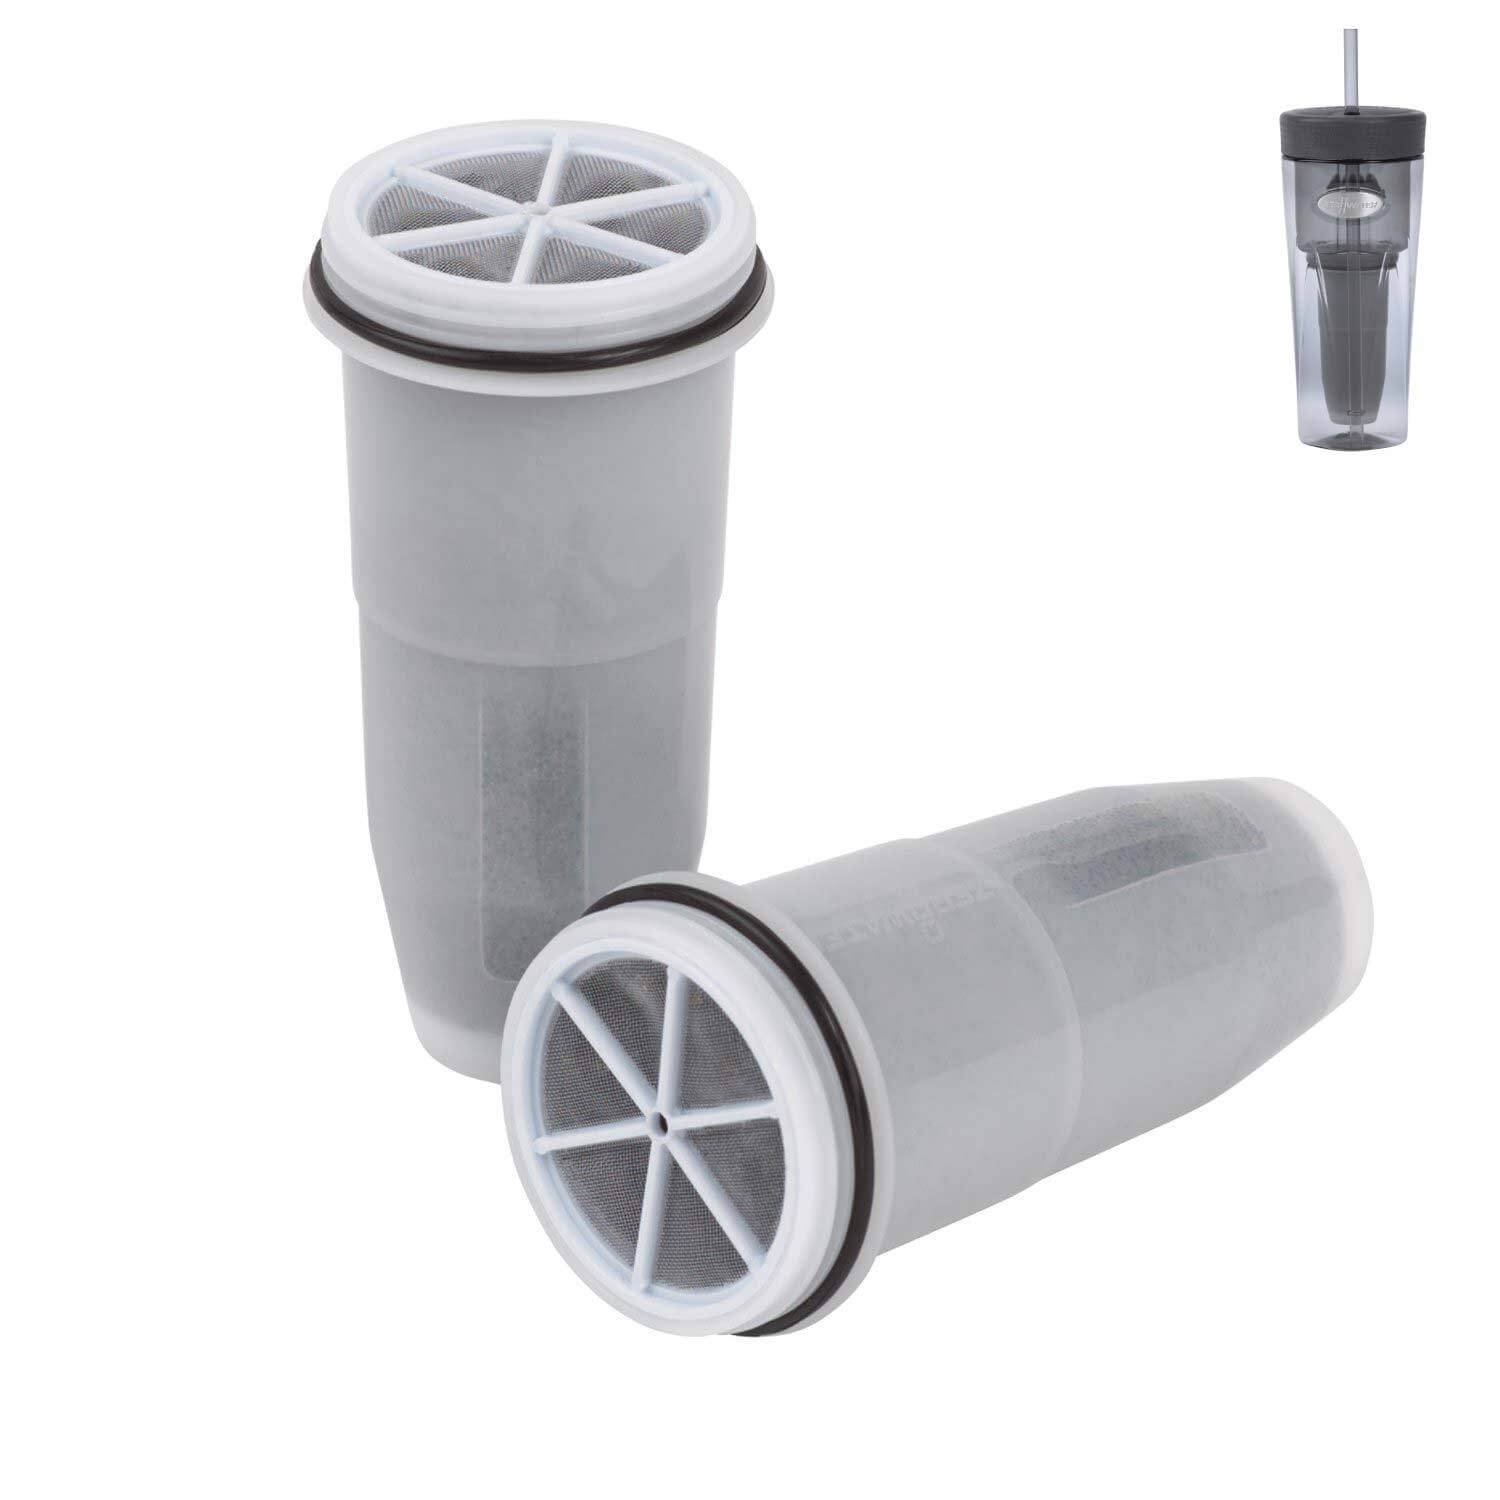 2 Pack Zerowater Replacement Filters for Pitchers 